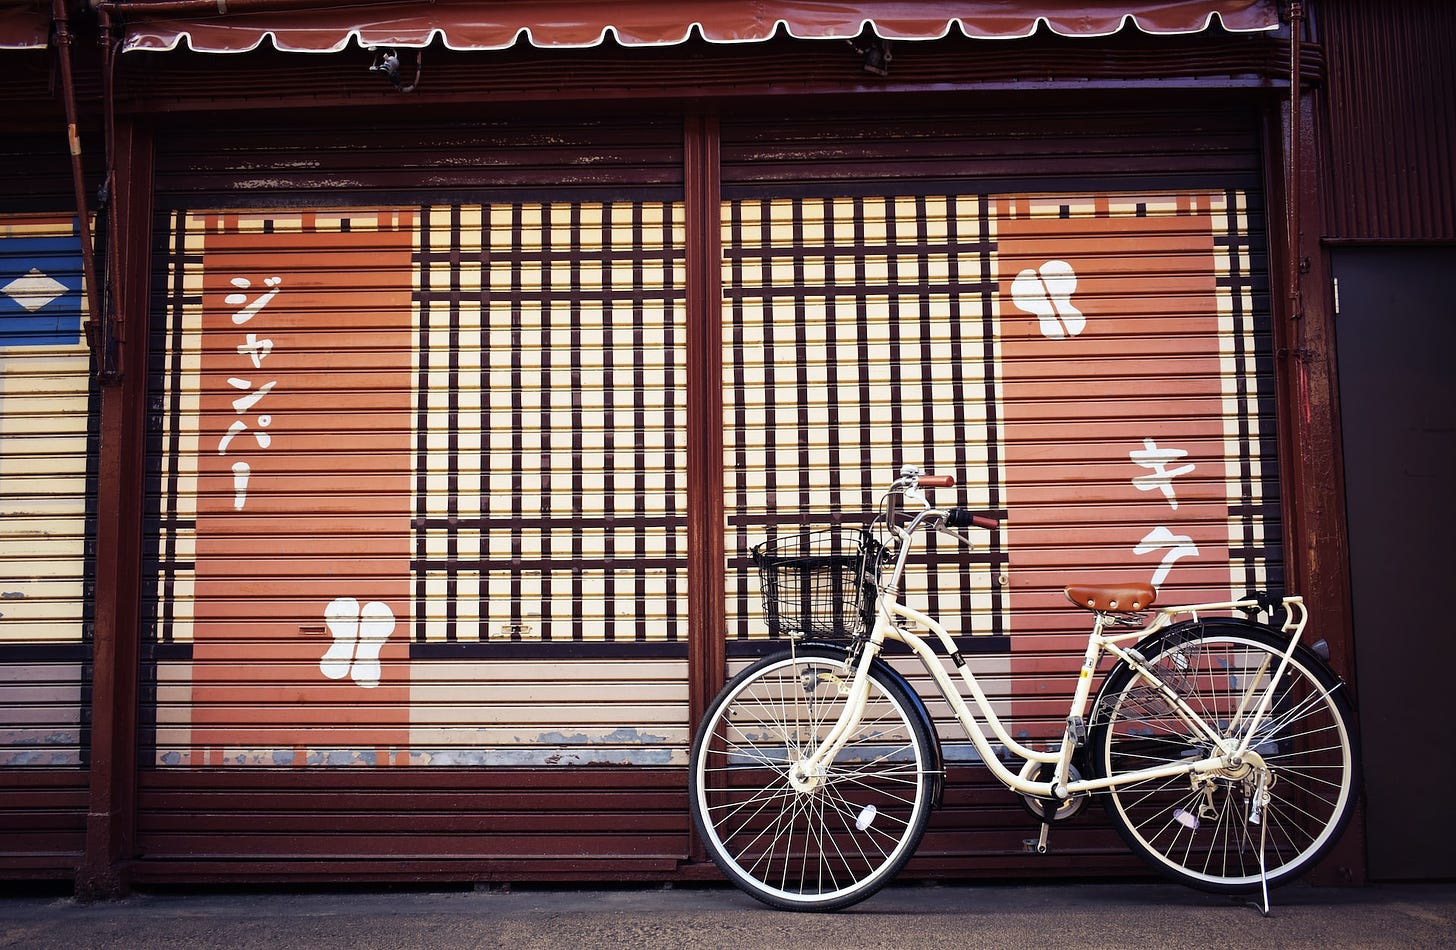 White bicycle in front of building with Japanese writing